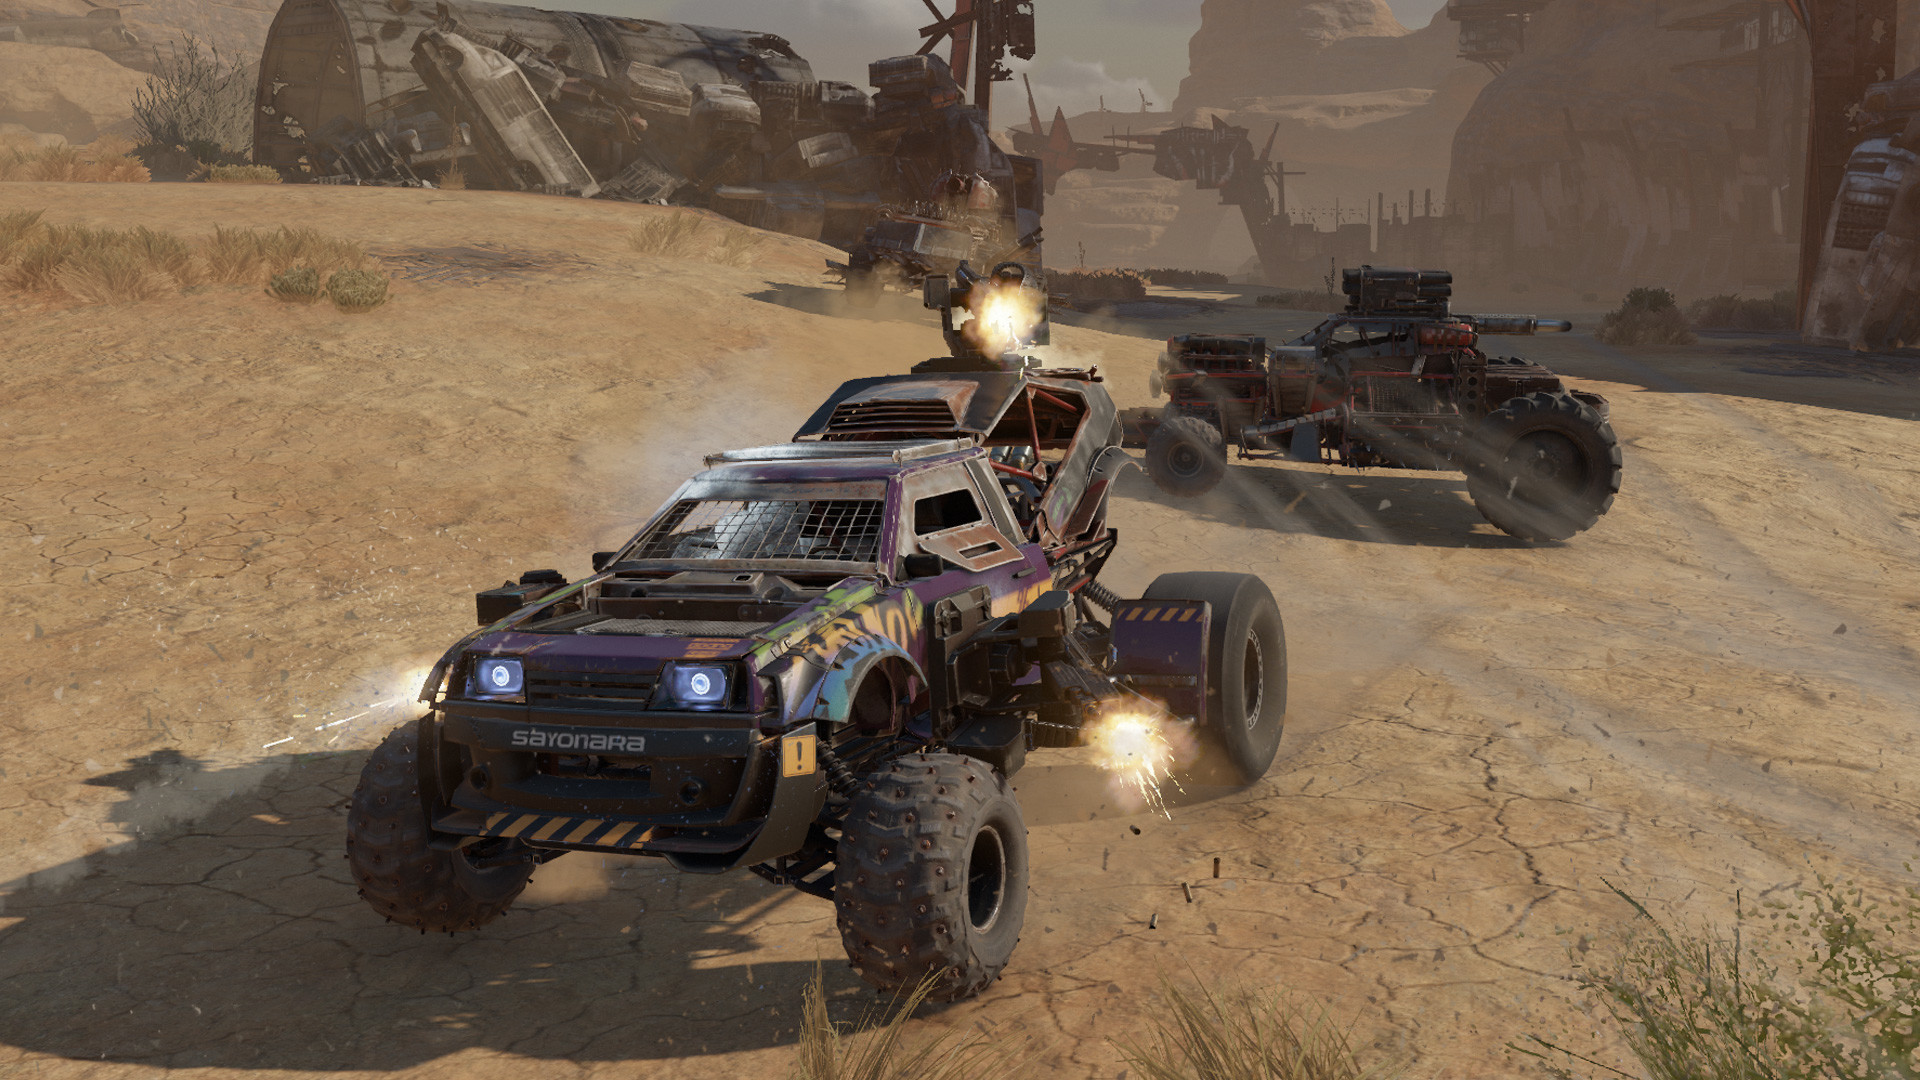 crossout steam download free